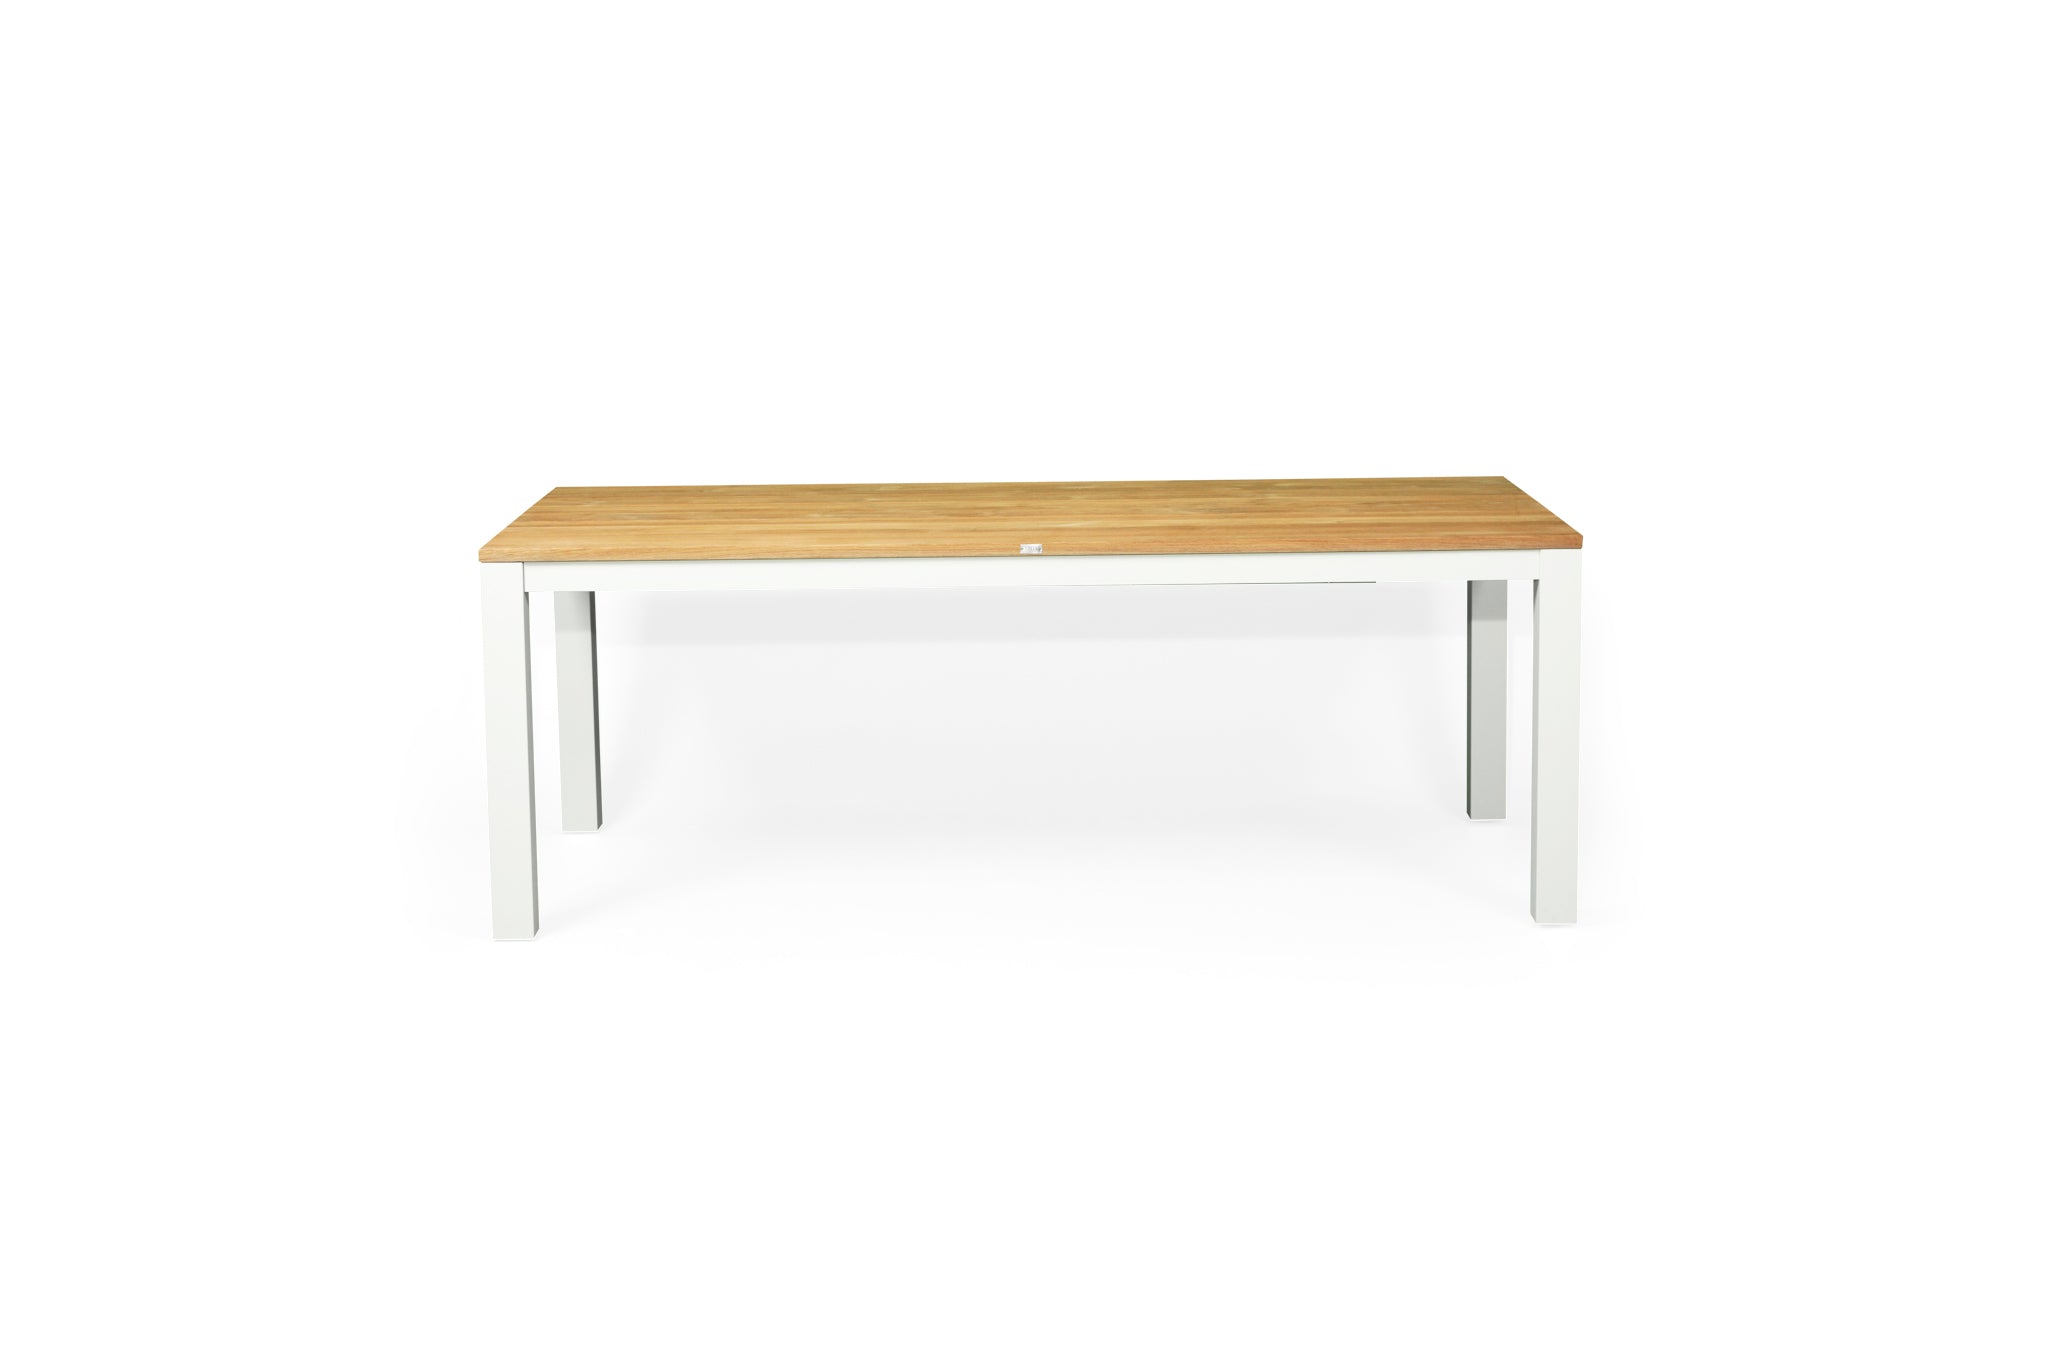 Rose Bay Outdoor Extension Table 2.3m – White Powder Coated Legs